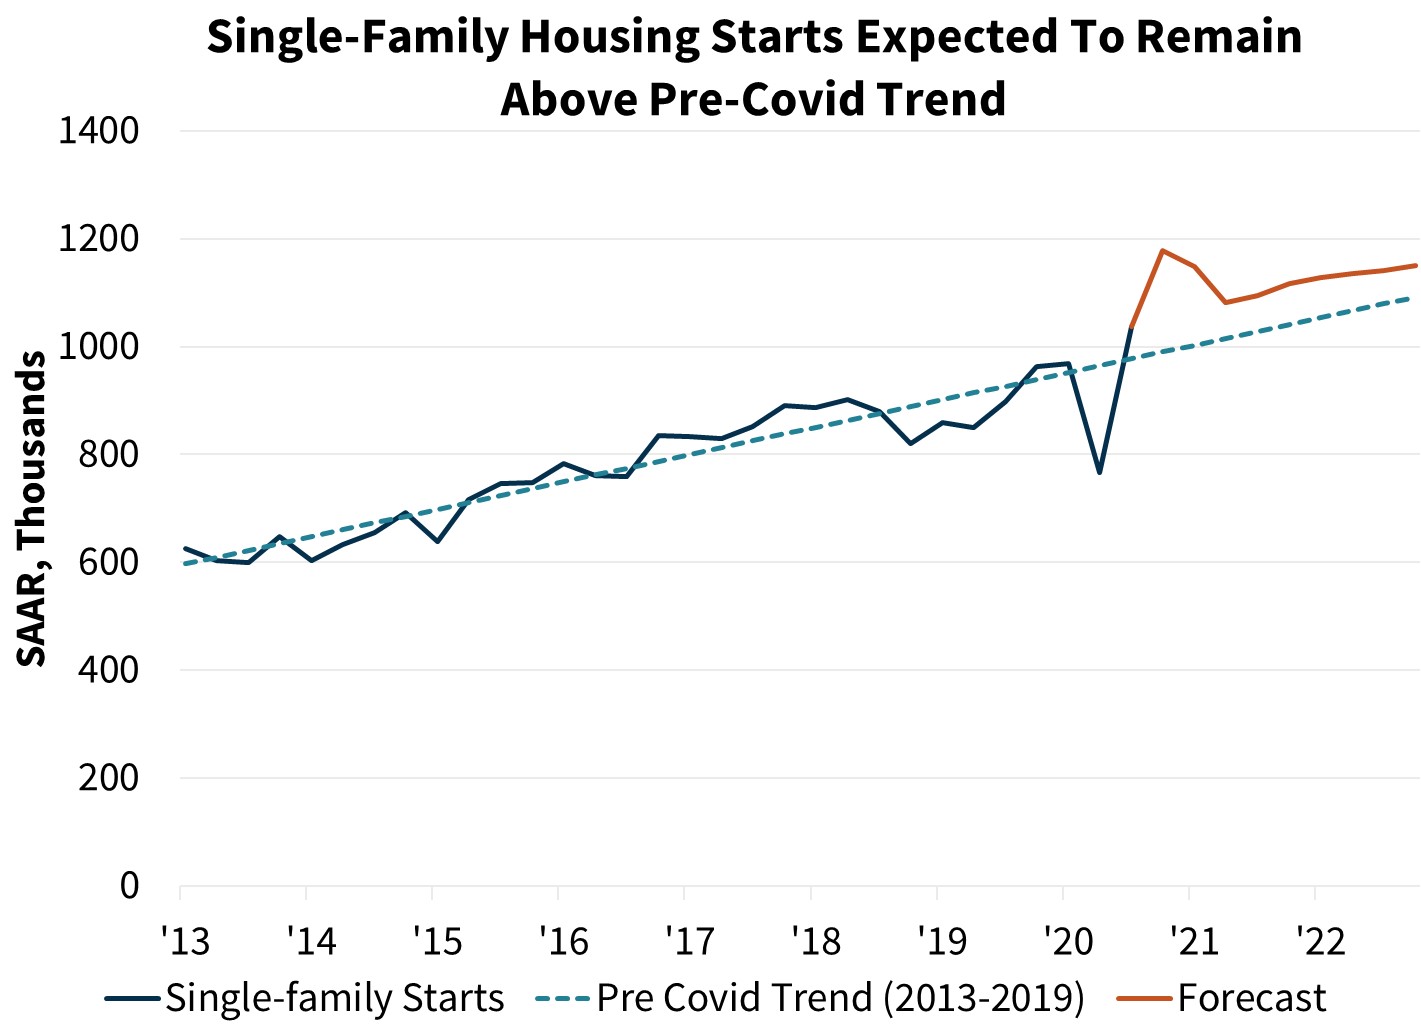  Single-Family Housing Starts Expected to Remain Above Pre-Covid Trend
